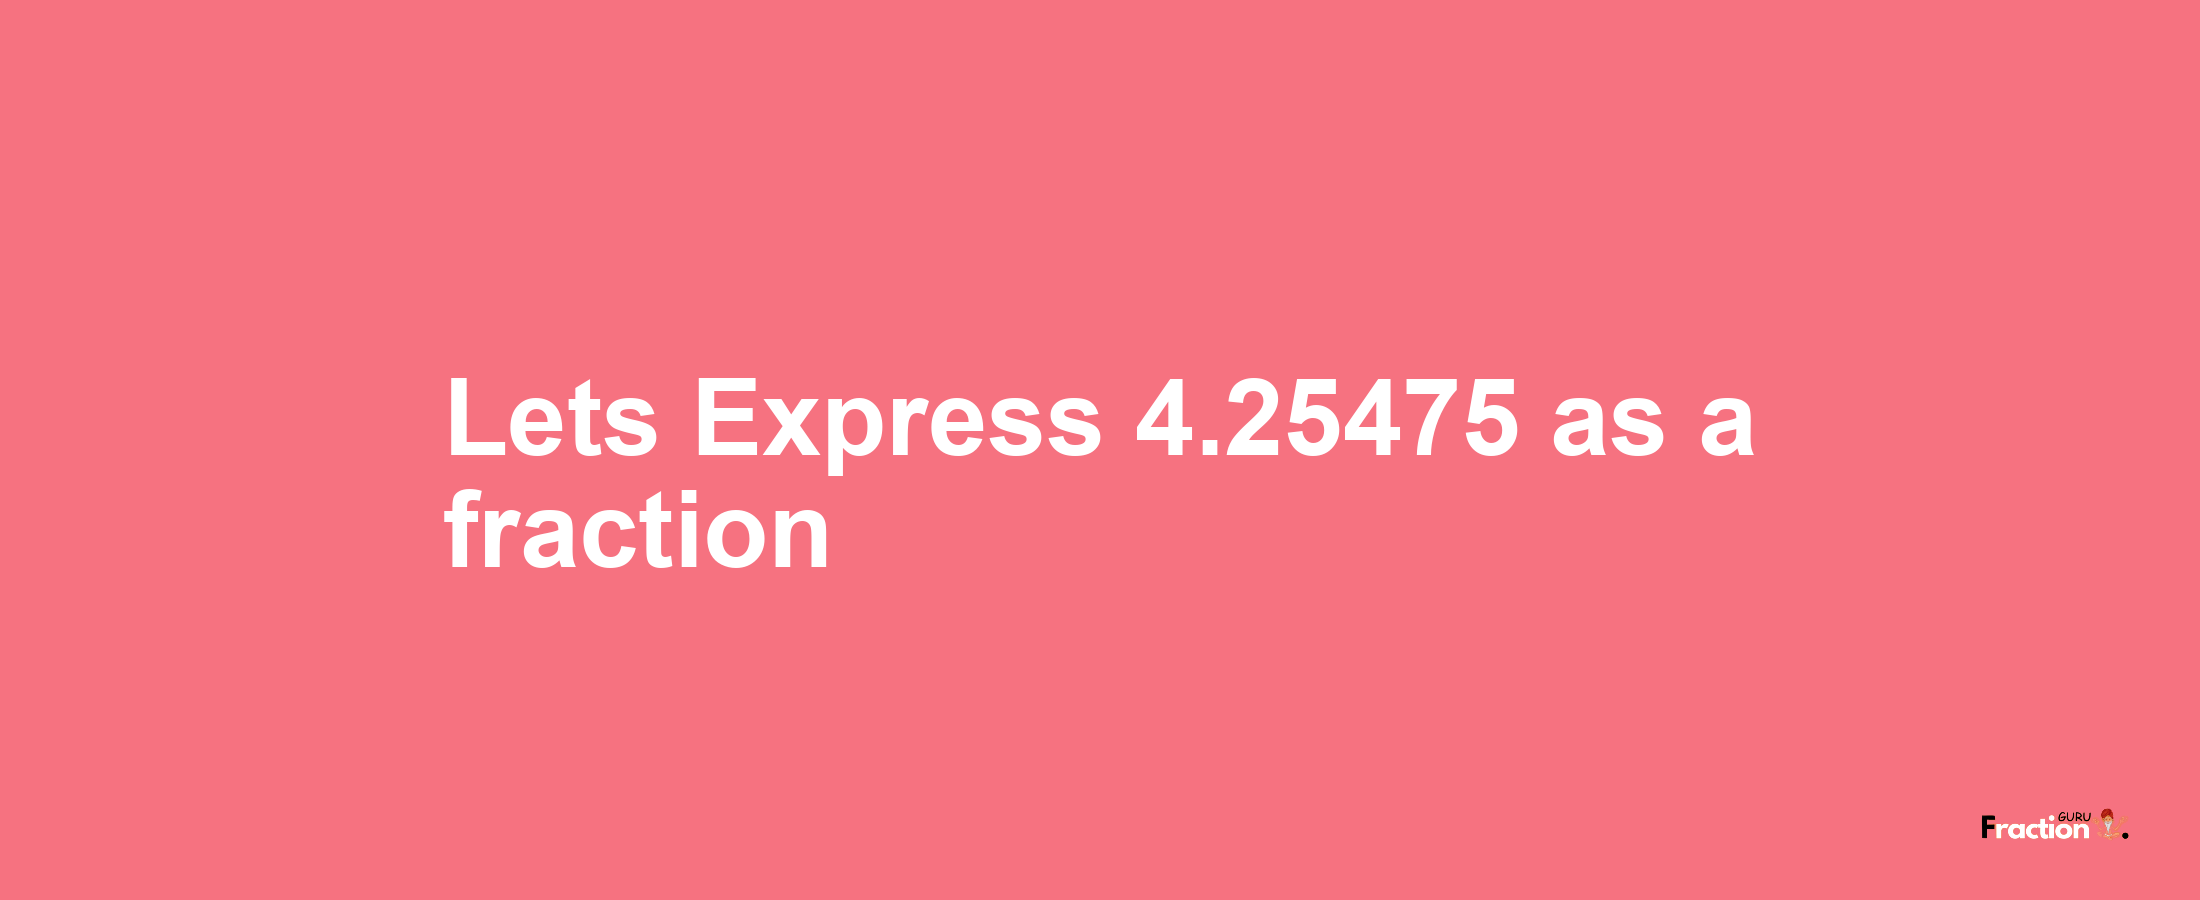 Lets Express 4.25475 as afraction